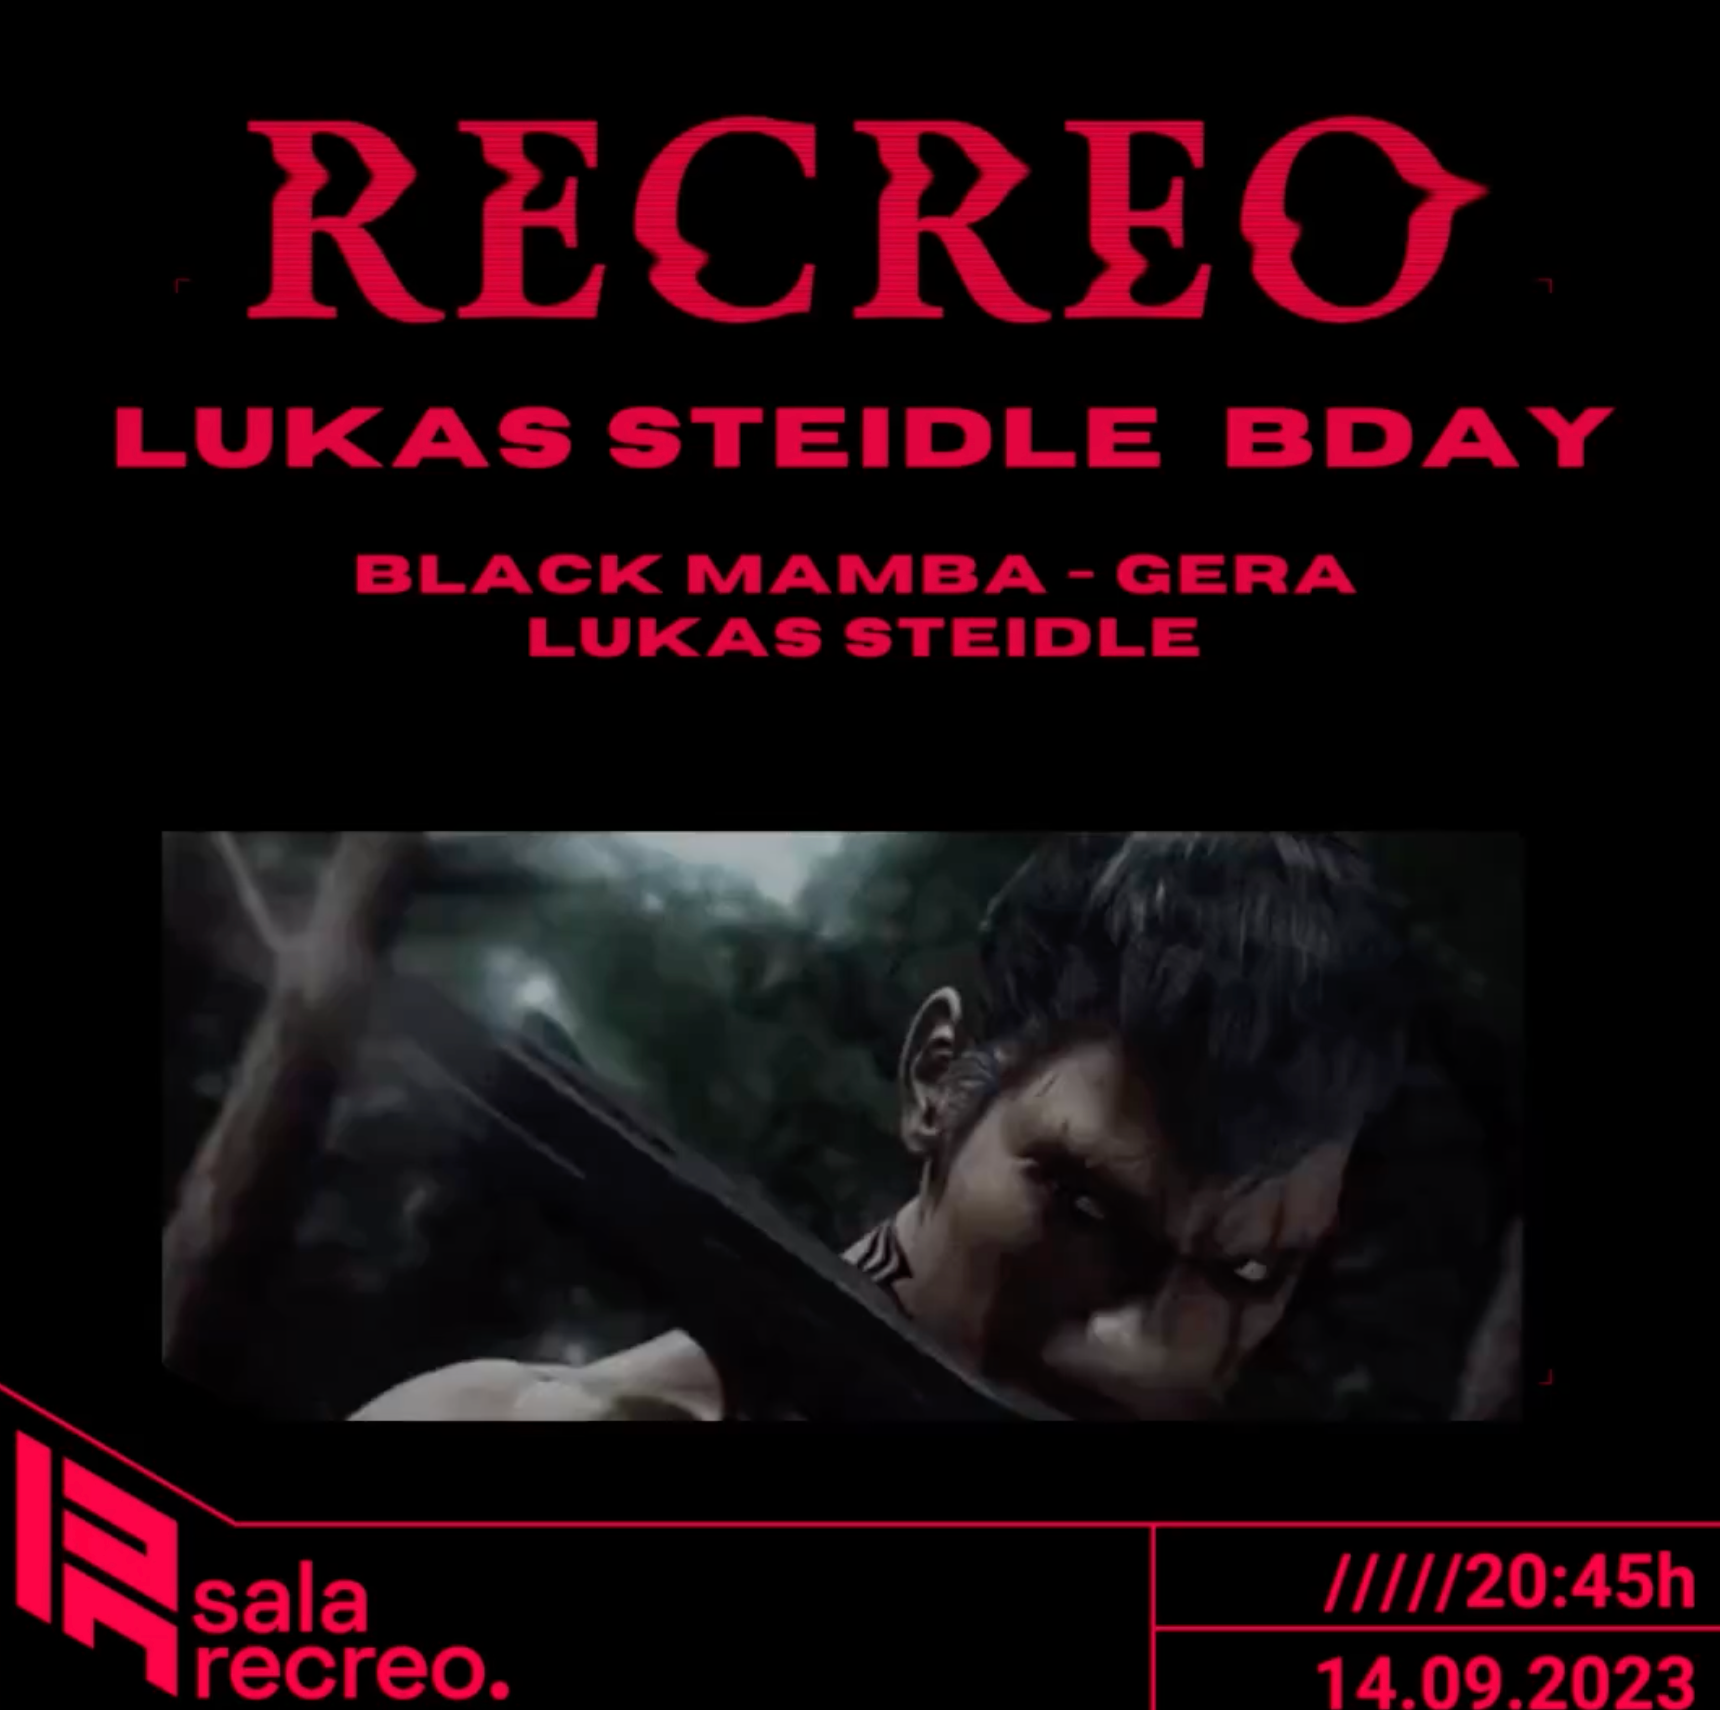 RECREO: Lukas Steidle b-day - フライヤー表